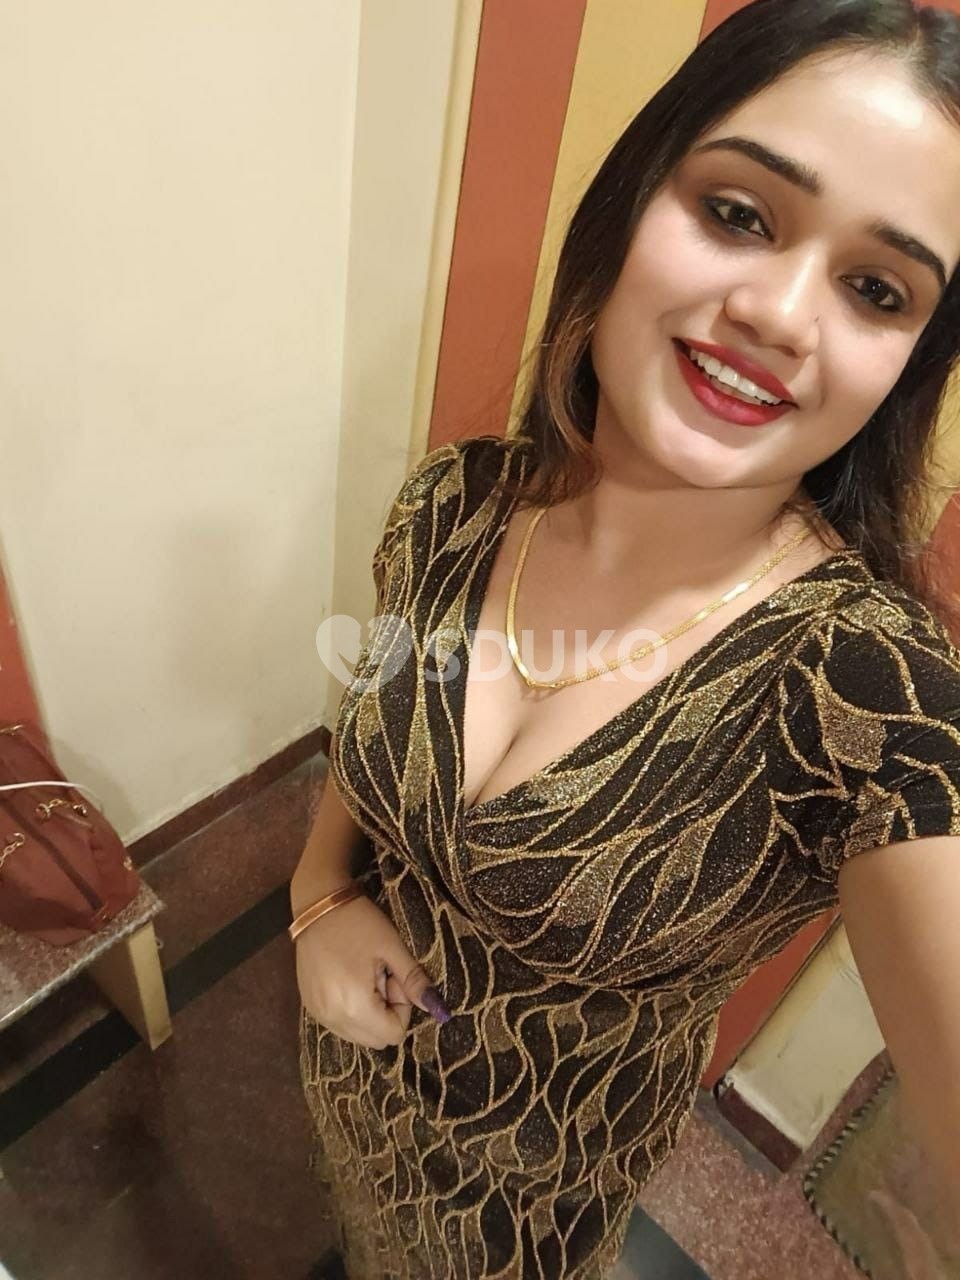 Panchkula full satisfied call girl service.iuiu 24 hours available.oo